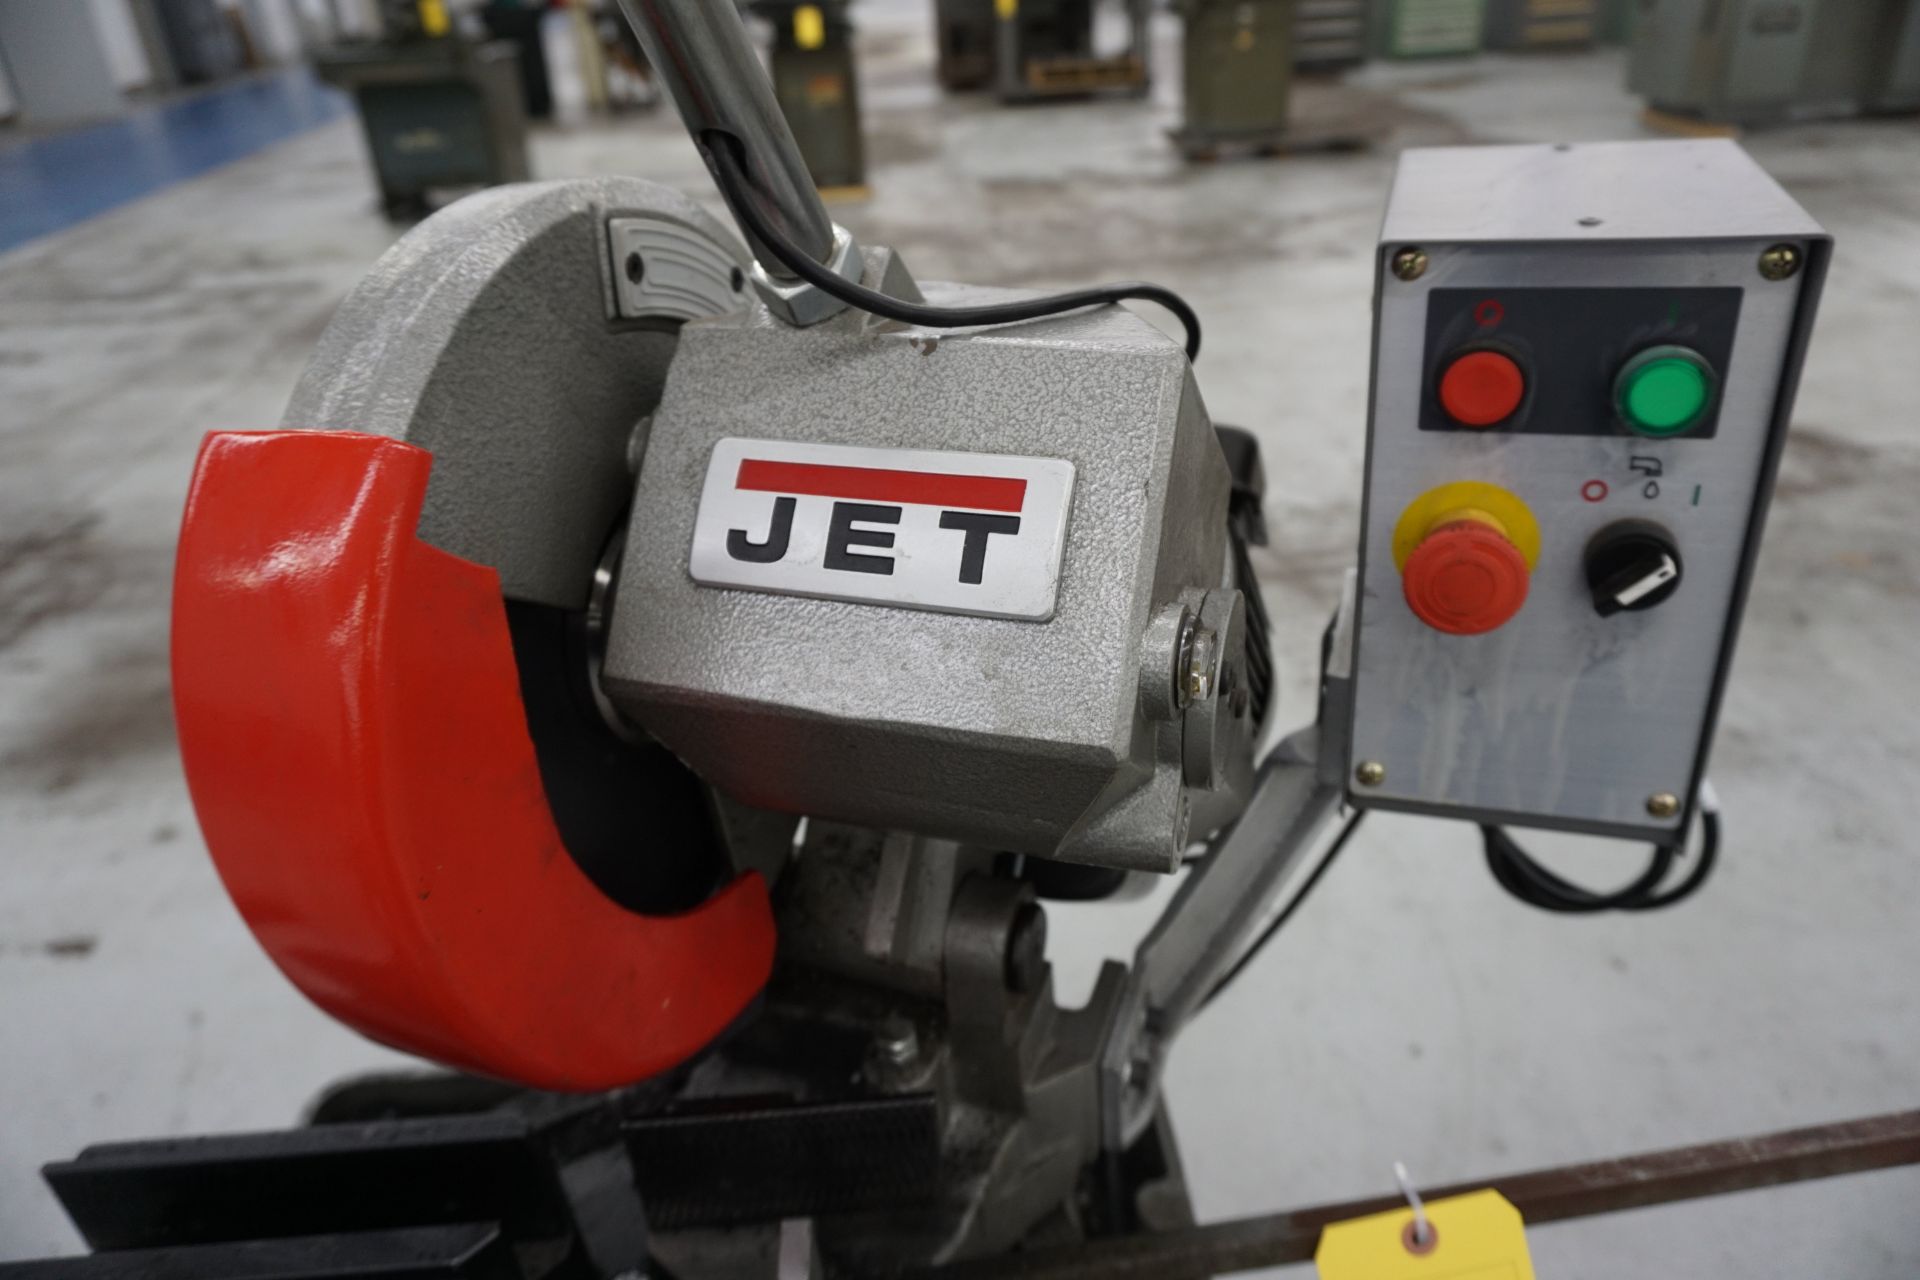 JET 275MM MANUAL FERROUS COLD SAW, MDL: CS275-1 - Image 2 of 6